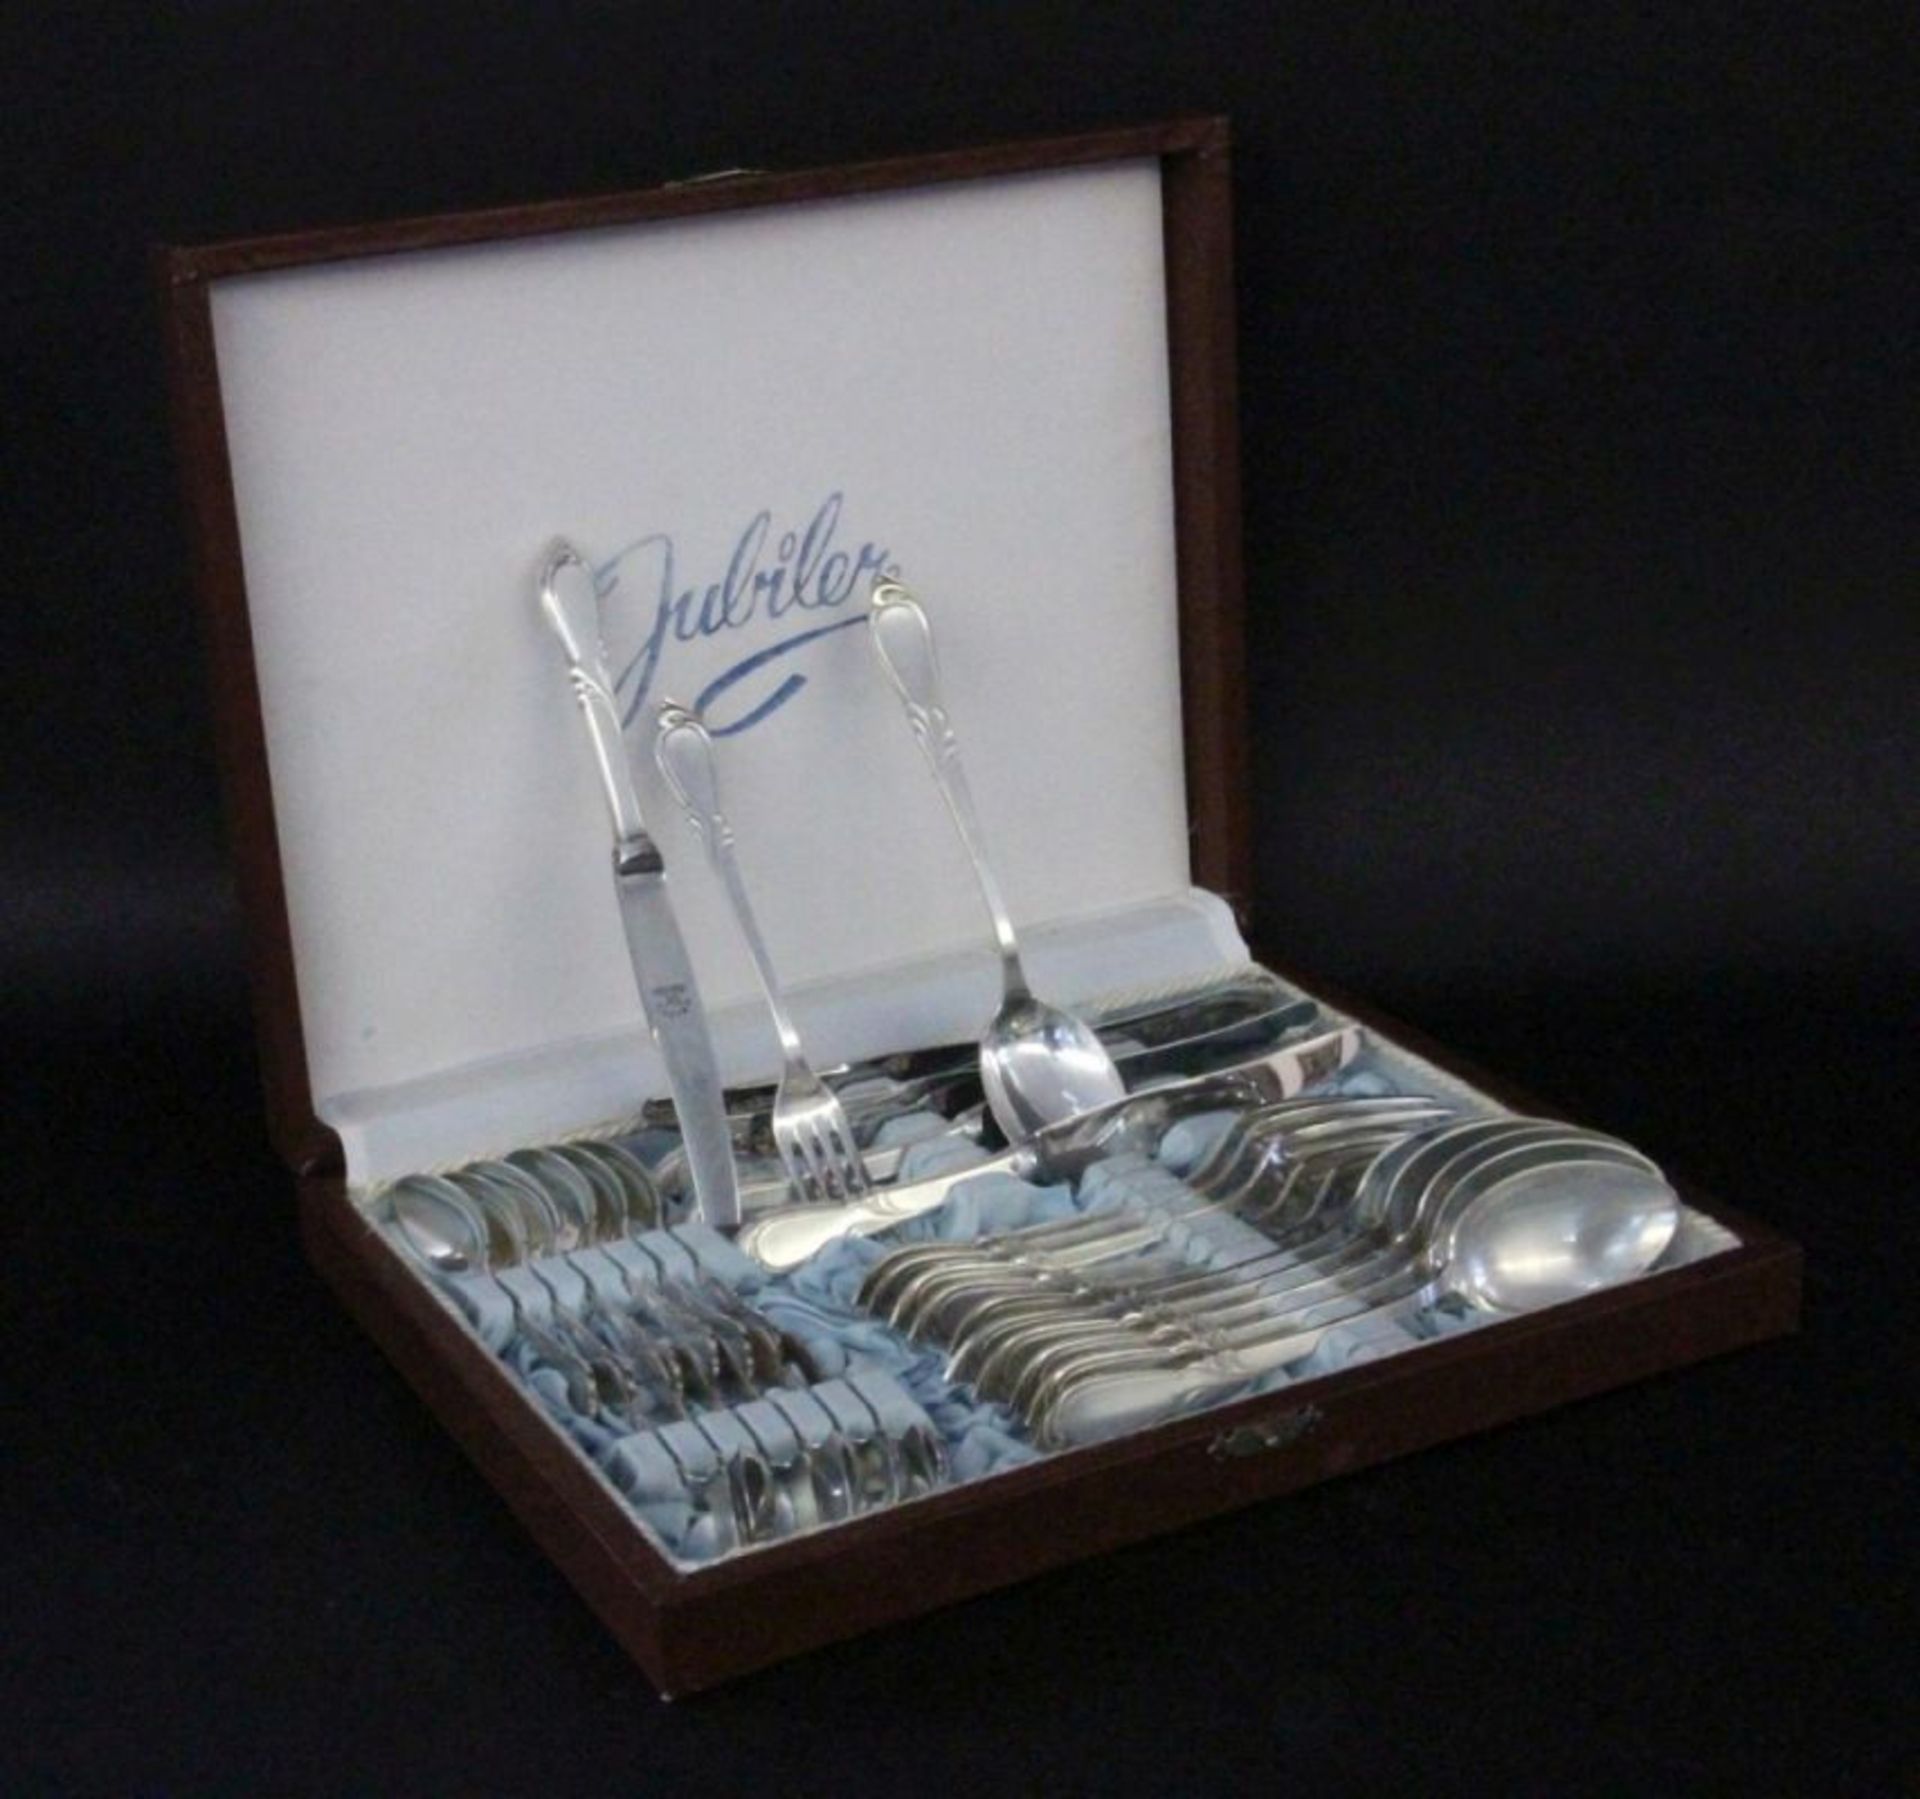 A CUTLERY SET Poland, 20th century 800/000 silver. 30 pieces, complete for 6 people in